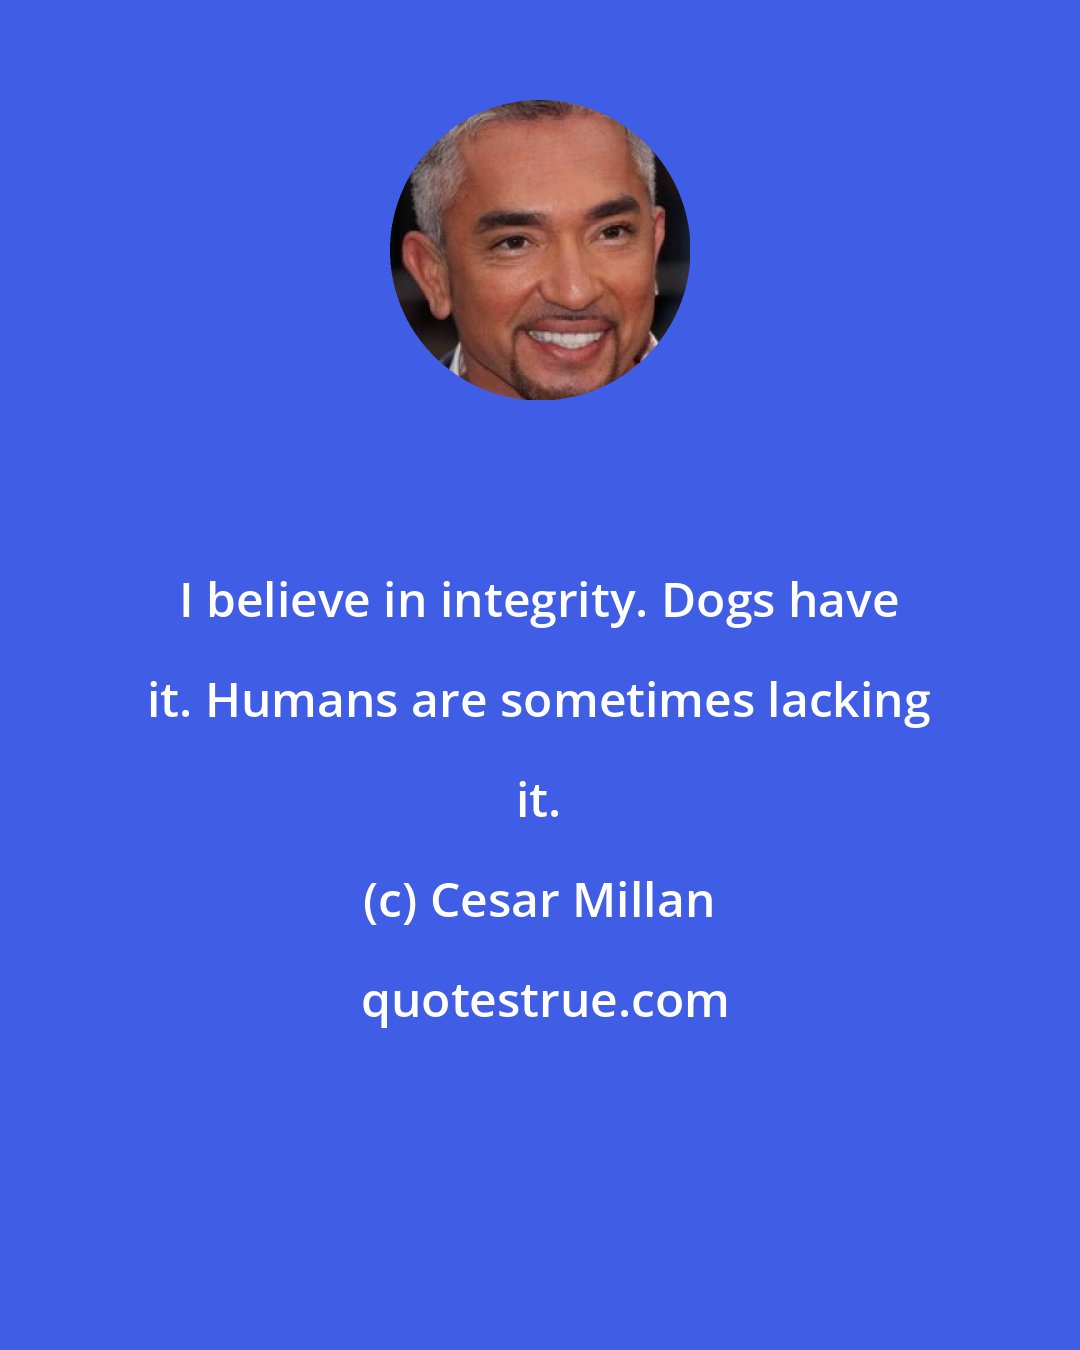 Cesar Millan: I believe in integrity. Dogs have it. Humans are sometimes lacking it.